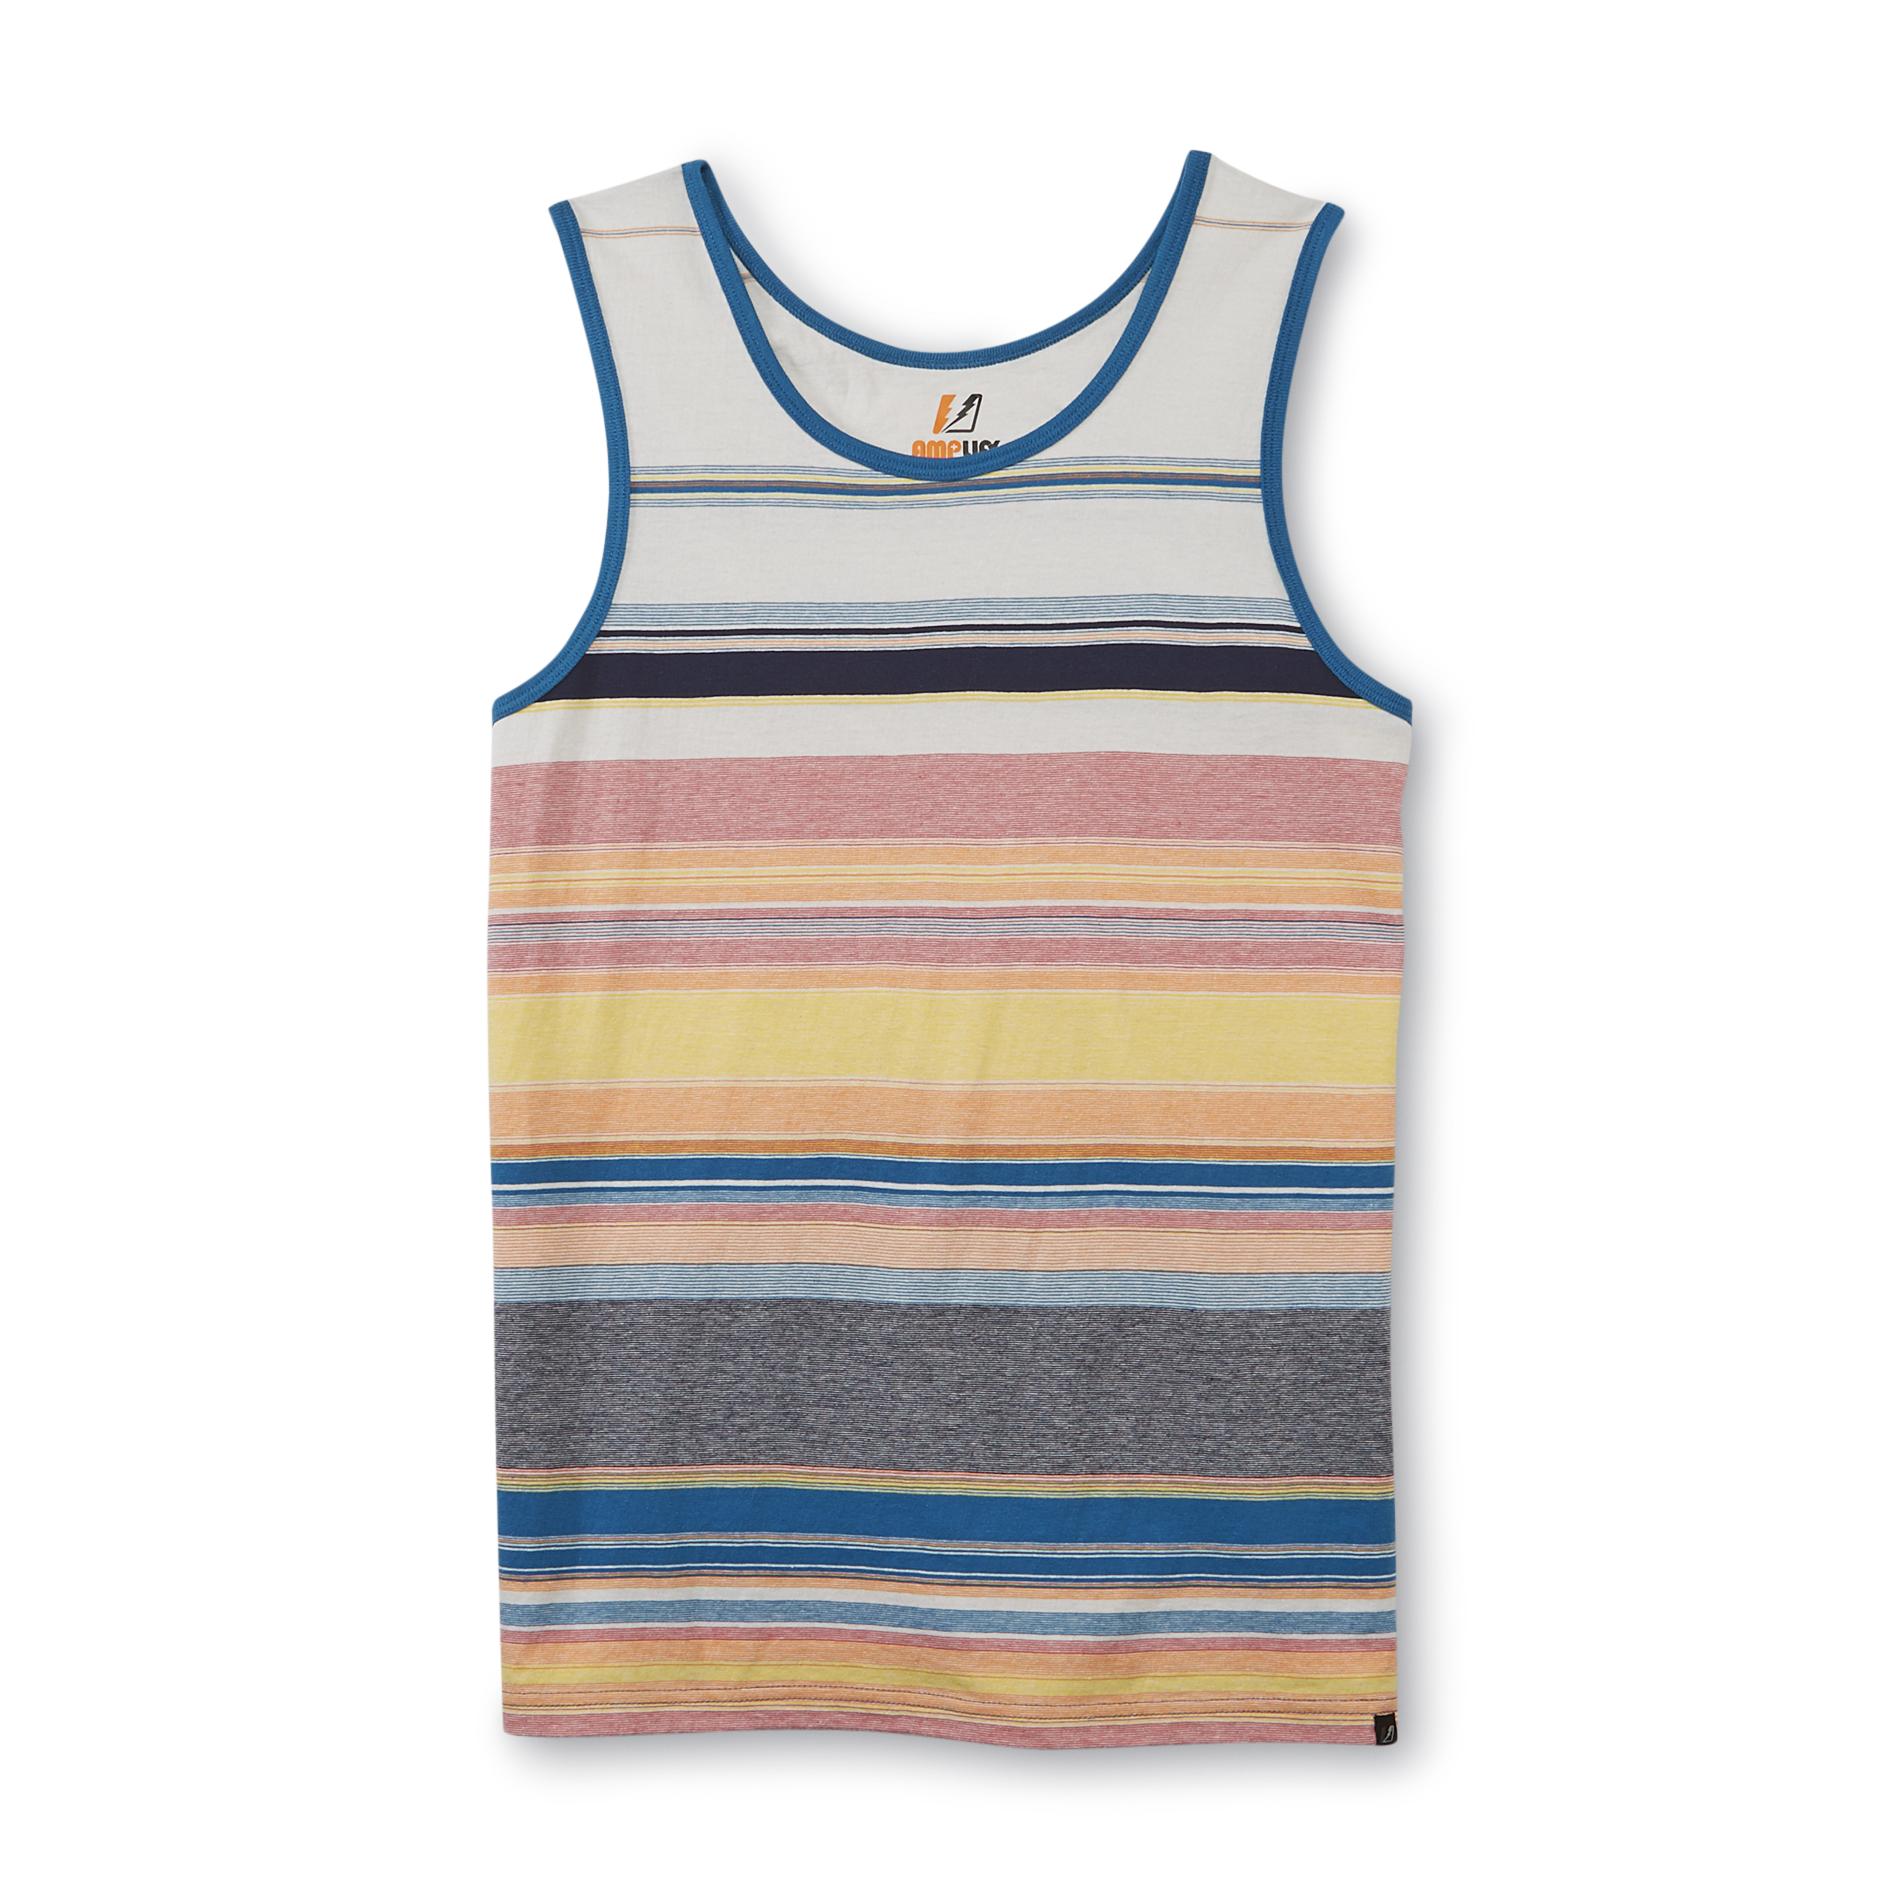 Amplify Young Men's Tank Top - Striped